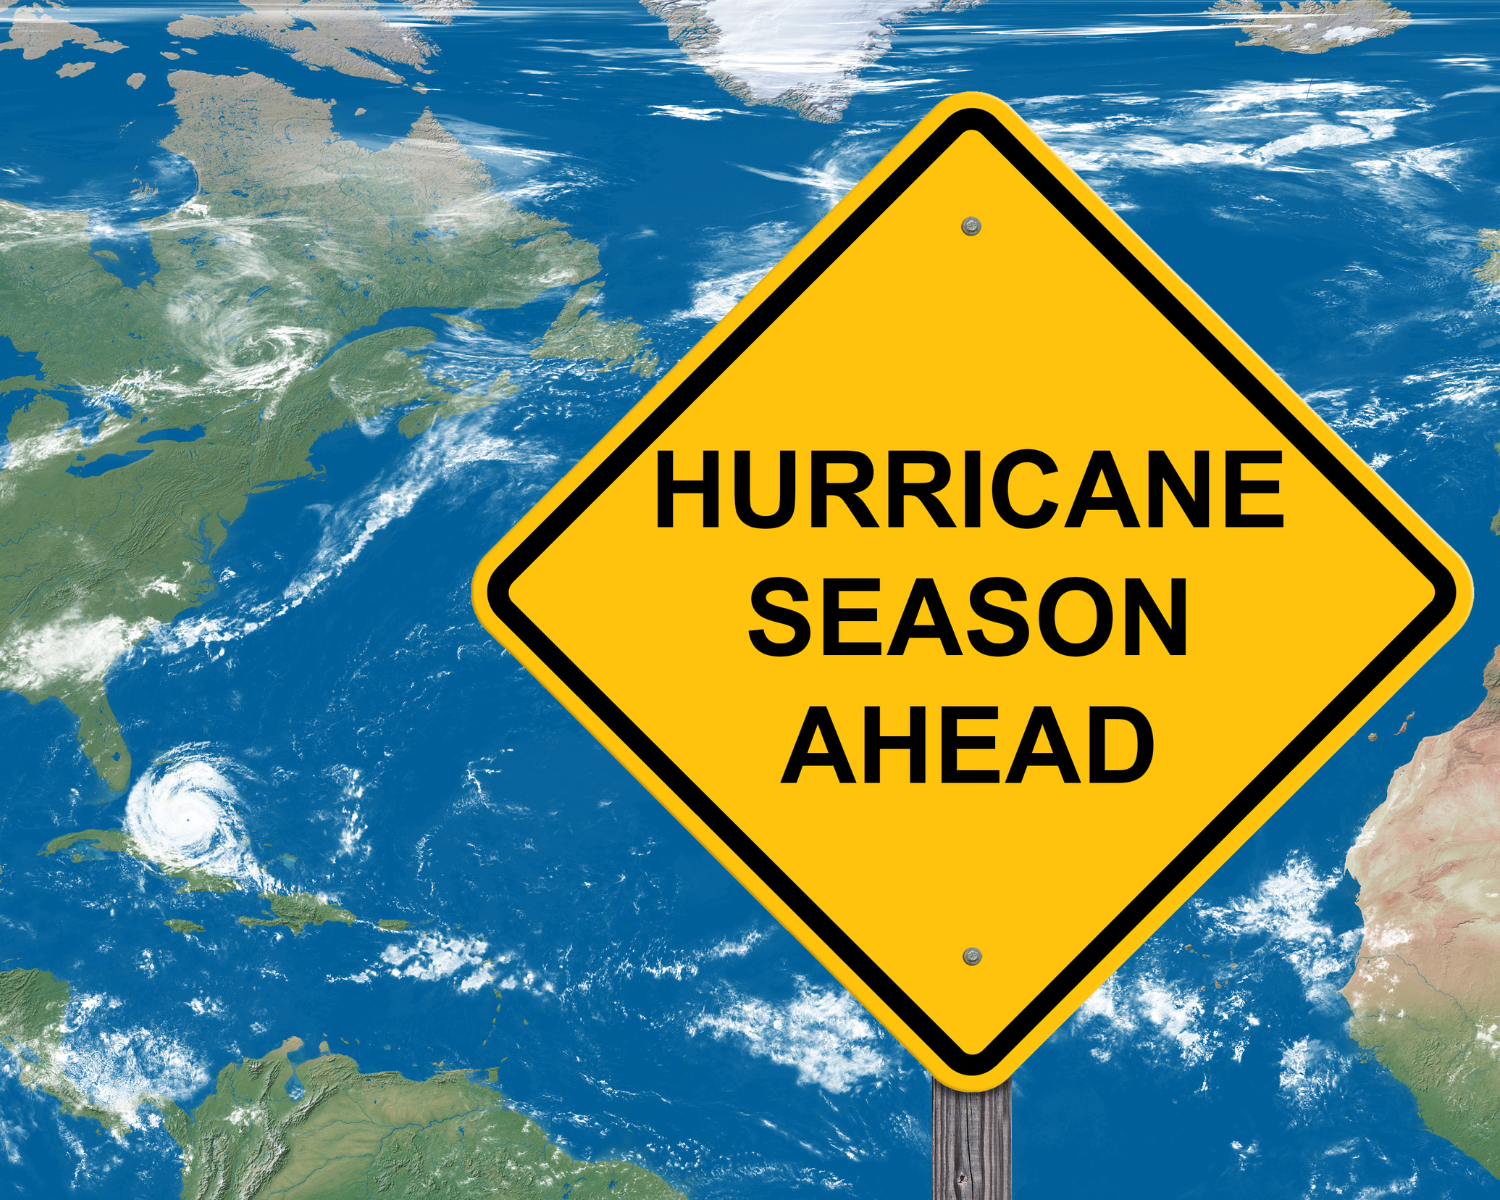 Shelter in the Storm: Stay Safe and Secure in Hurricane Season